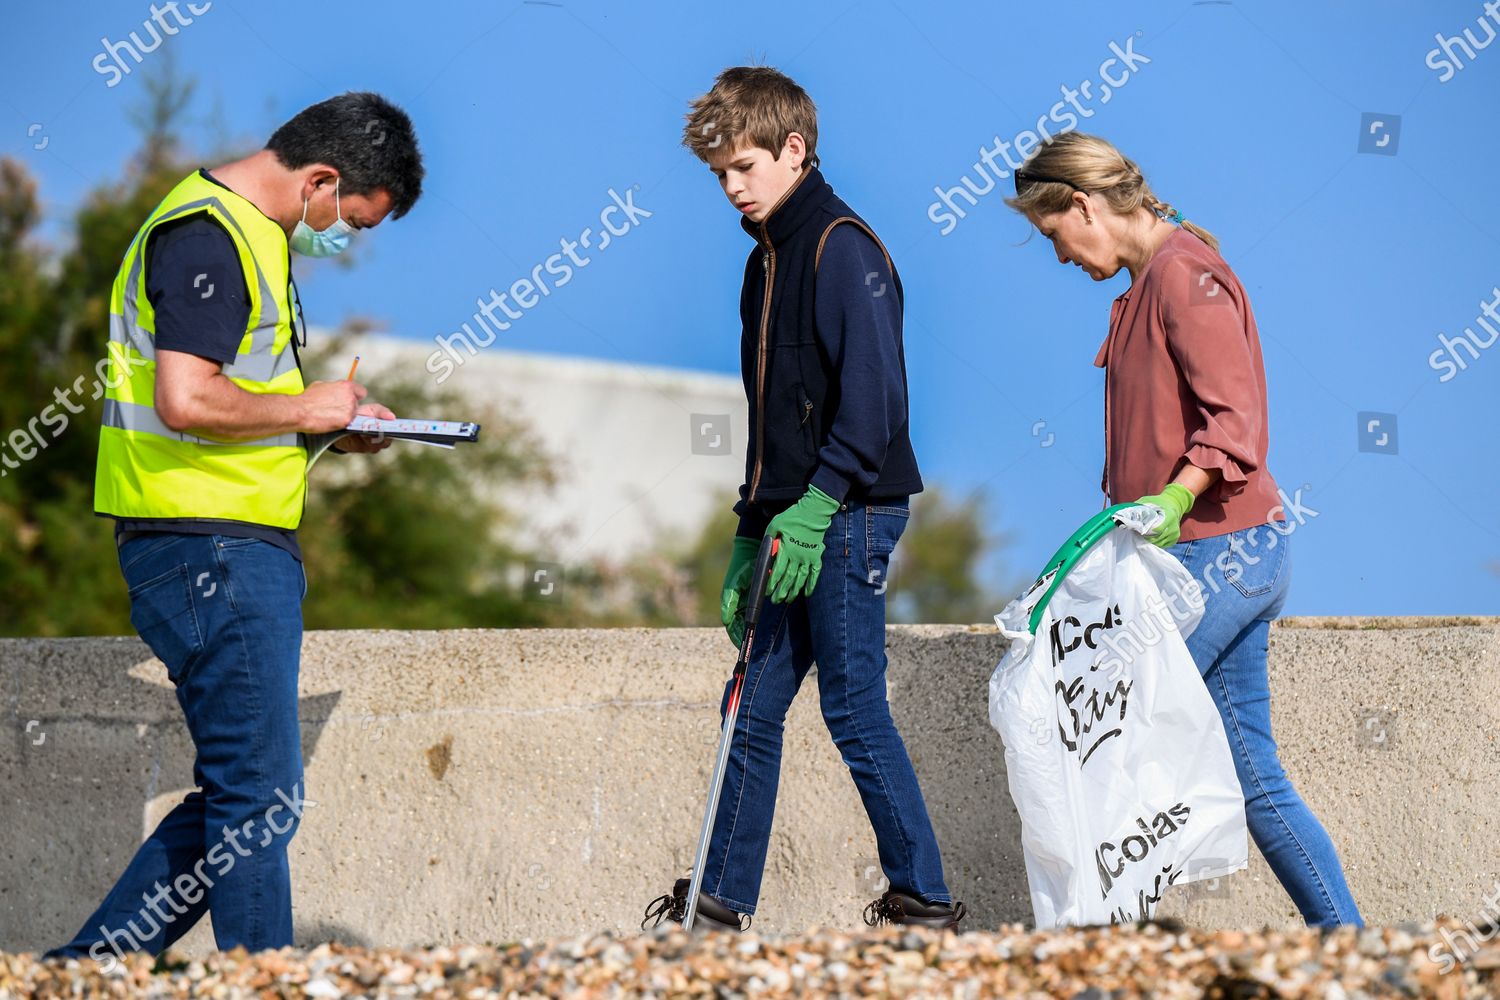 prince-edward-and-sophie-countess-of-wessex-great-british-beach-clean-southsea-beach-portsmouth-uk-shutterstock-editorial-10782998u.jpg